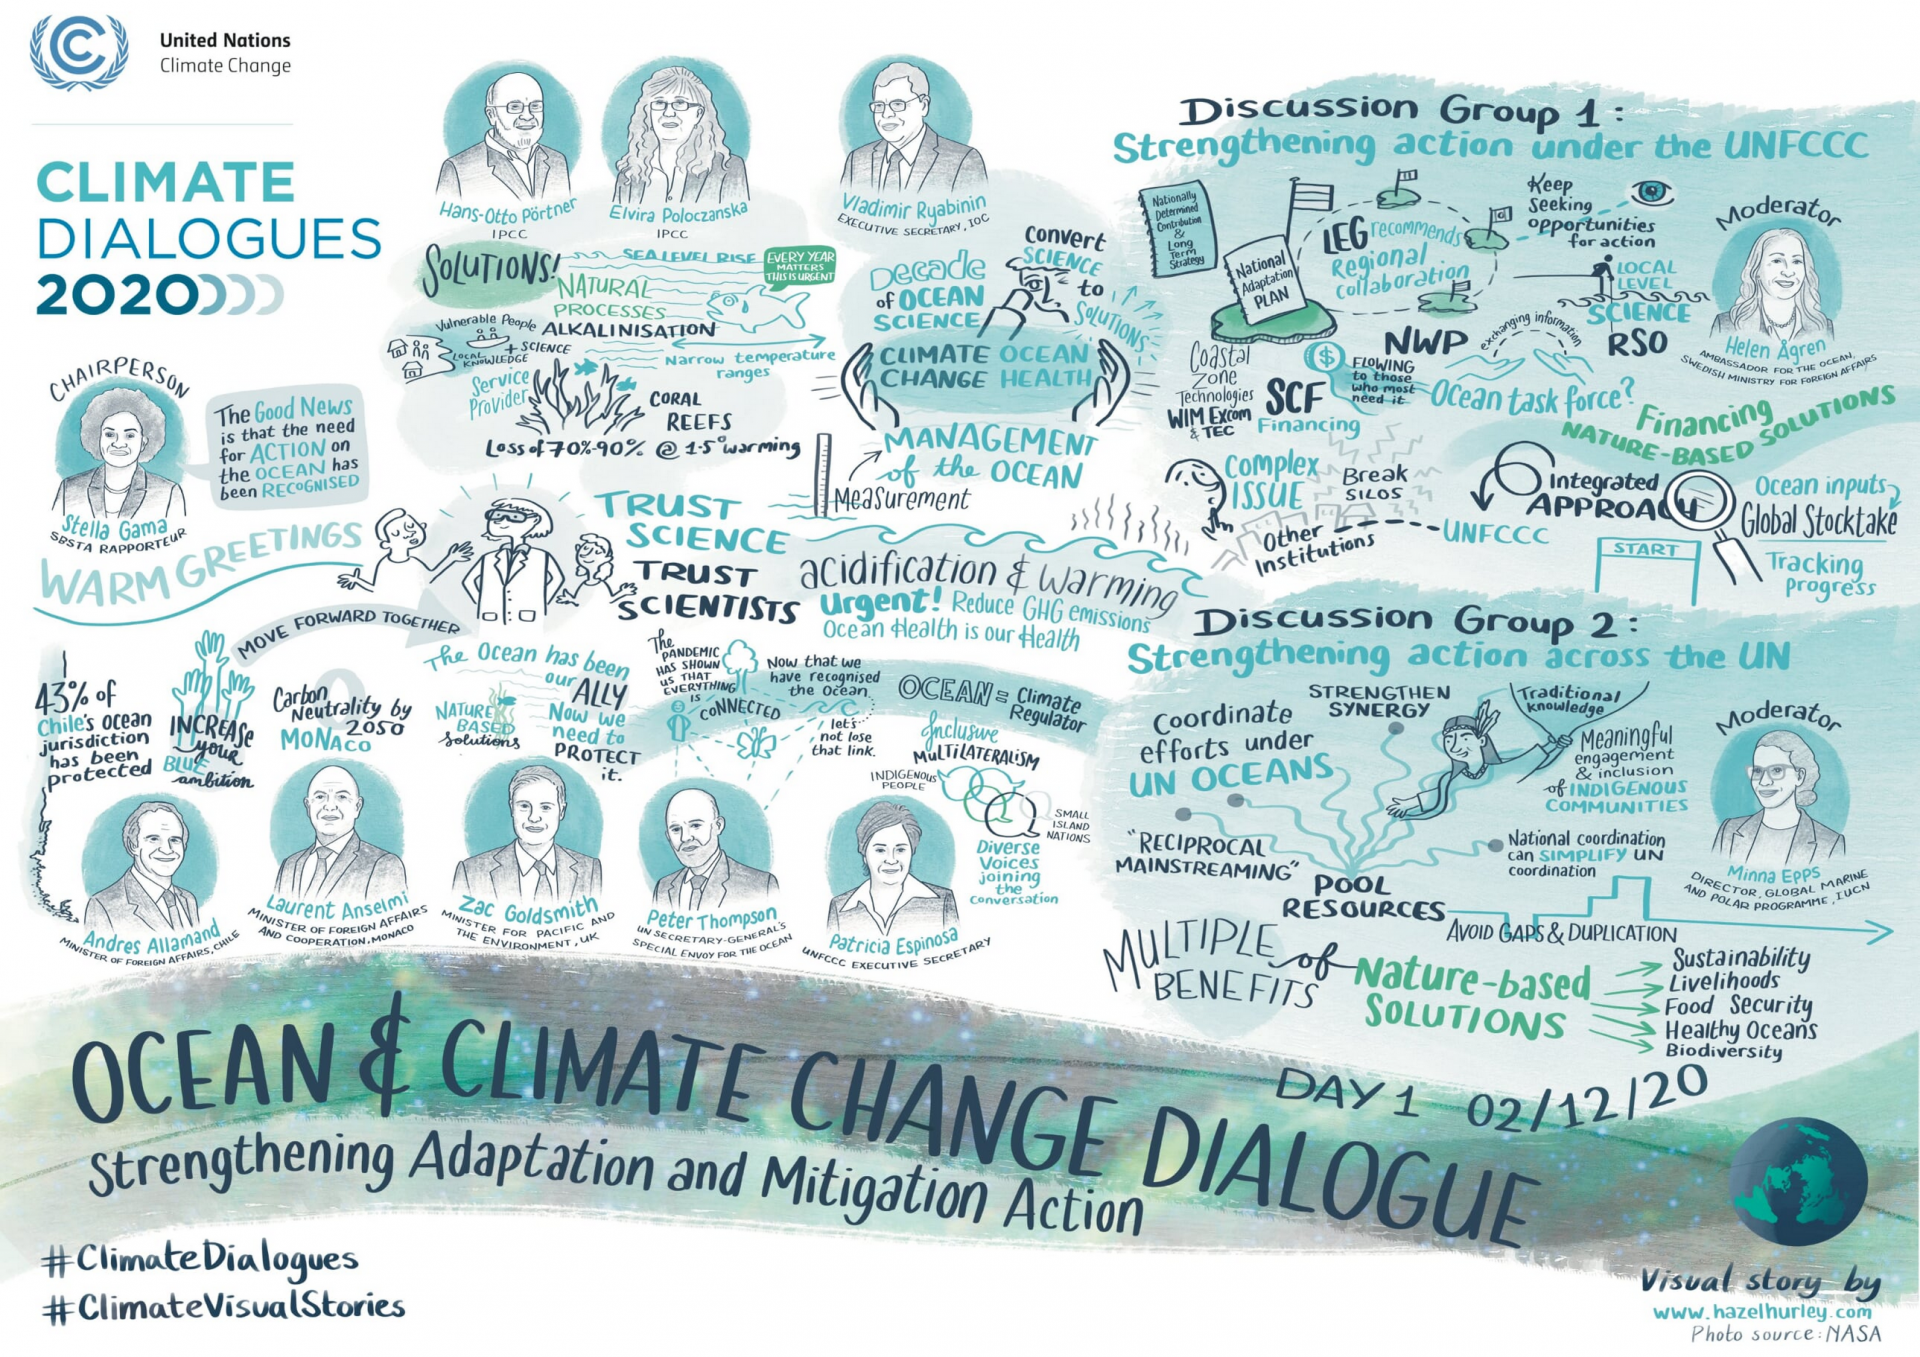 Ocean and Climate Change Dialogue to consider how to strengthen adaptation and mitigation action (day 1)